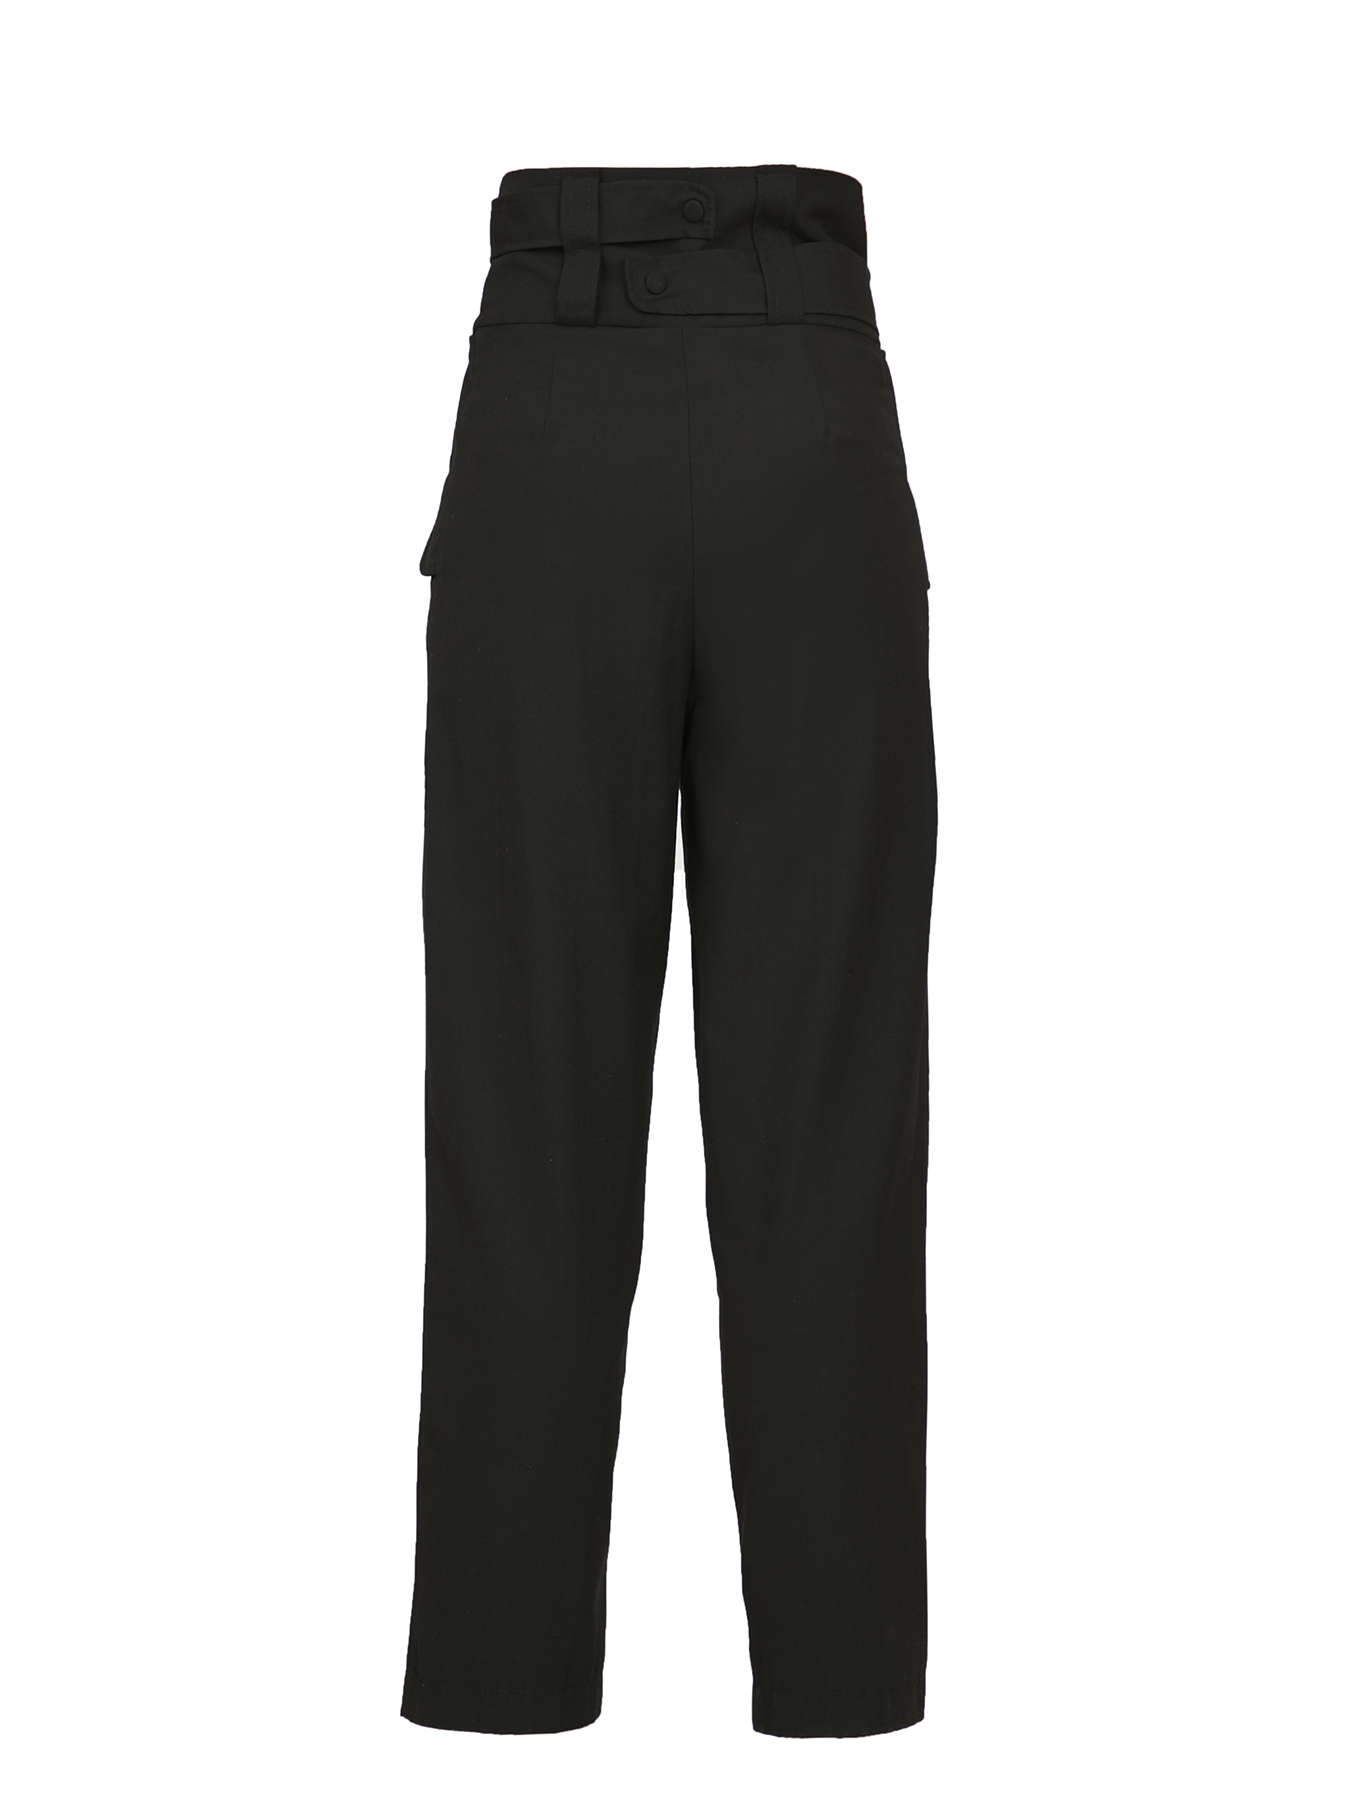 AW21-22. High-waisted black trousers (made to order)